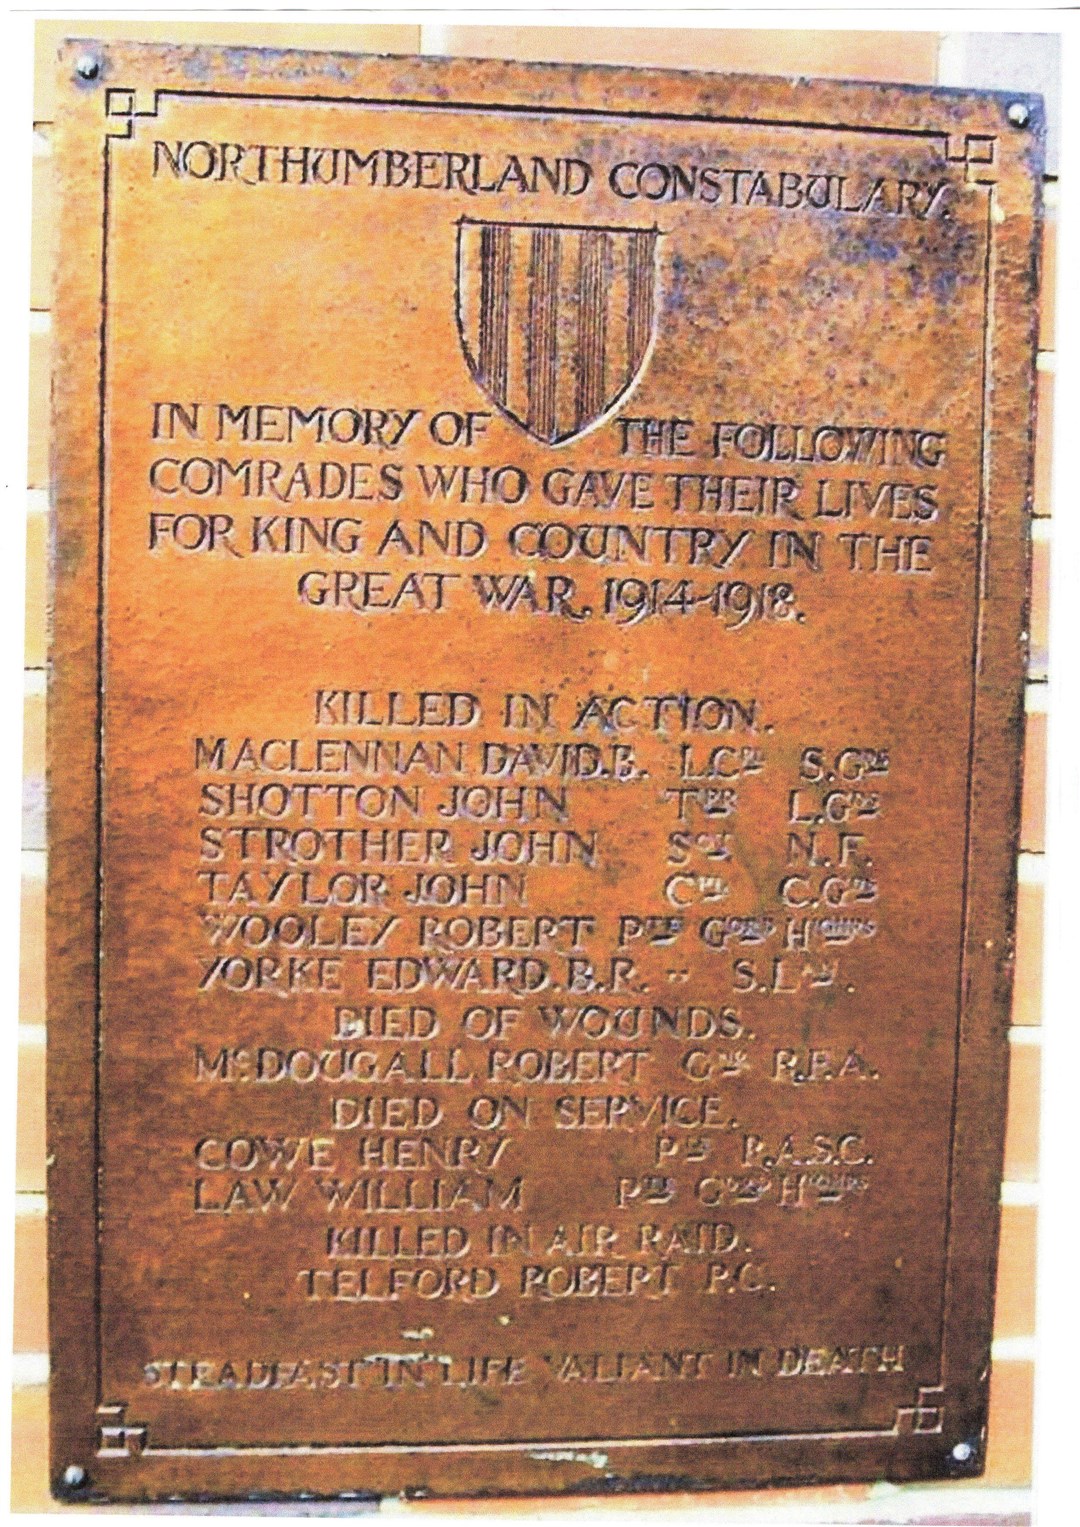 His name appears on this memorial erected in Northumberland.